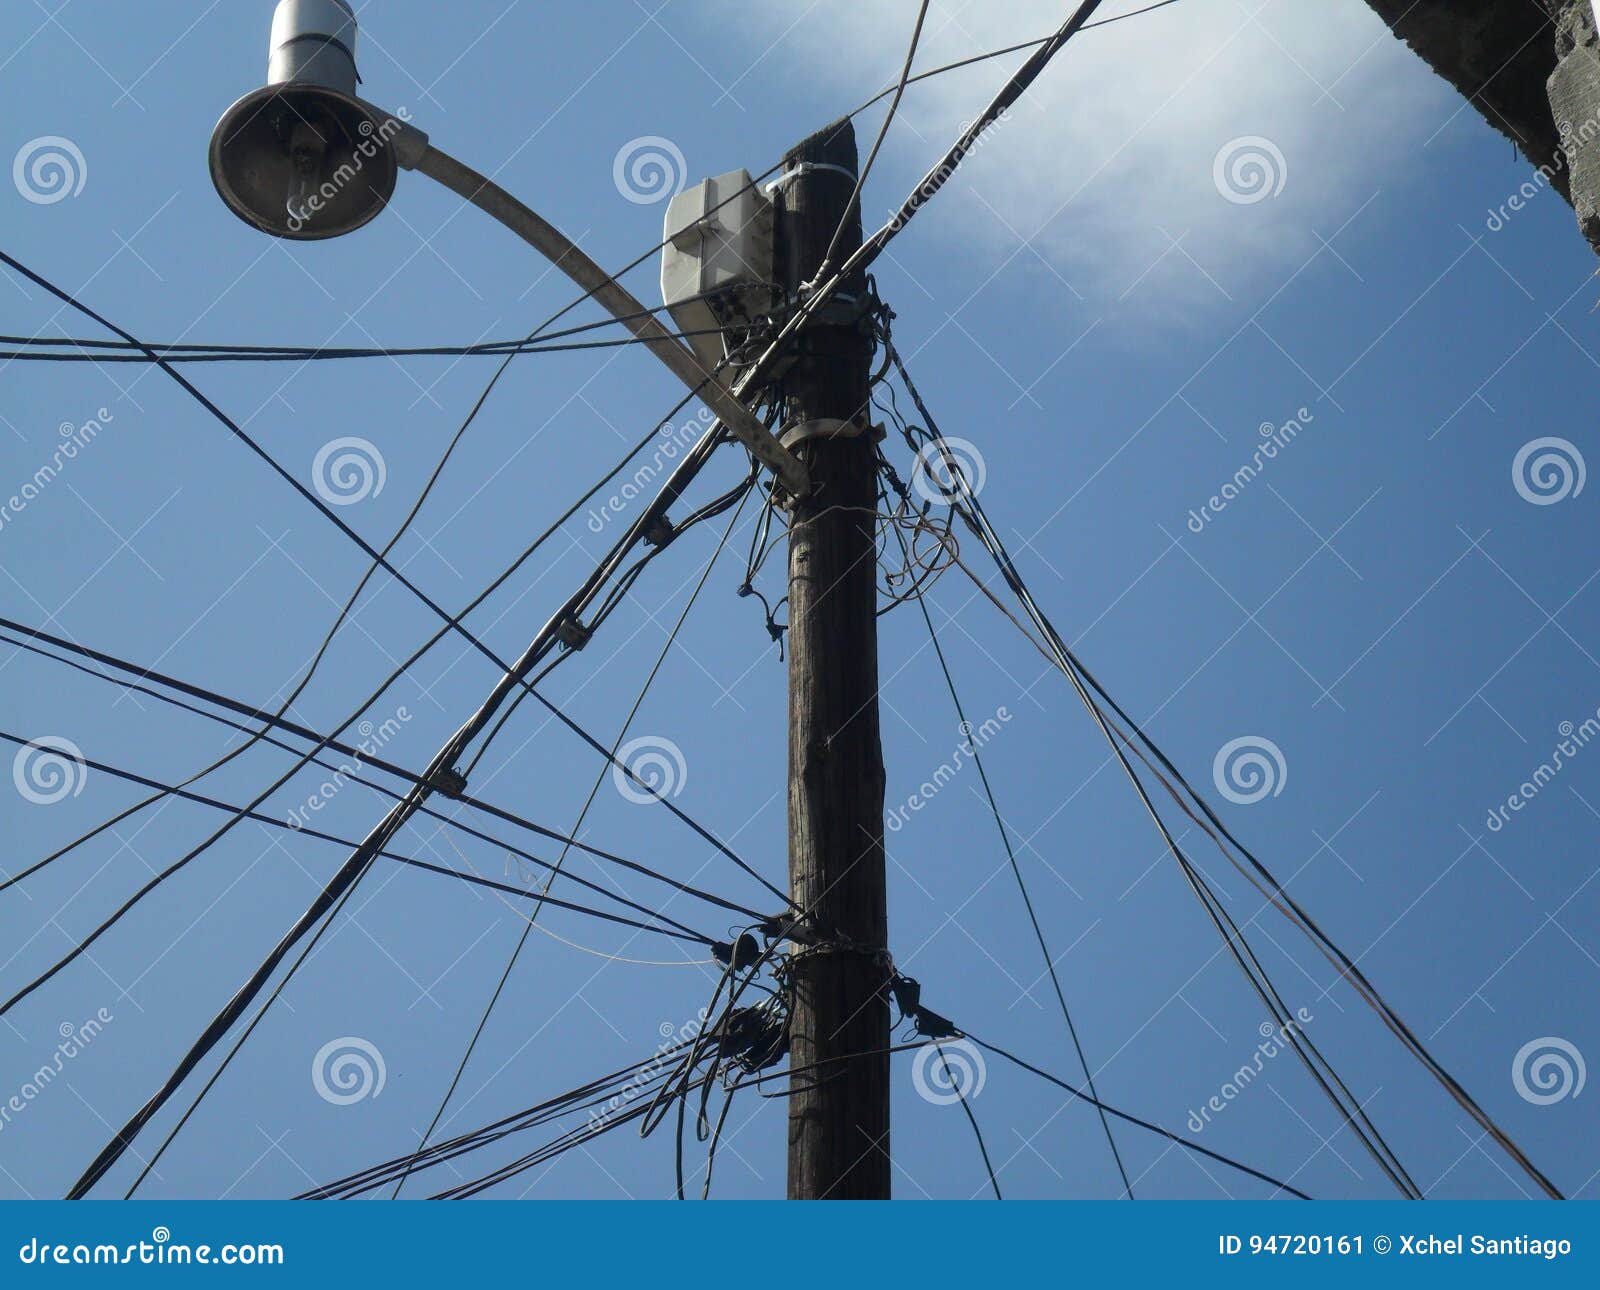 electric cables